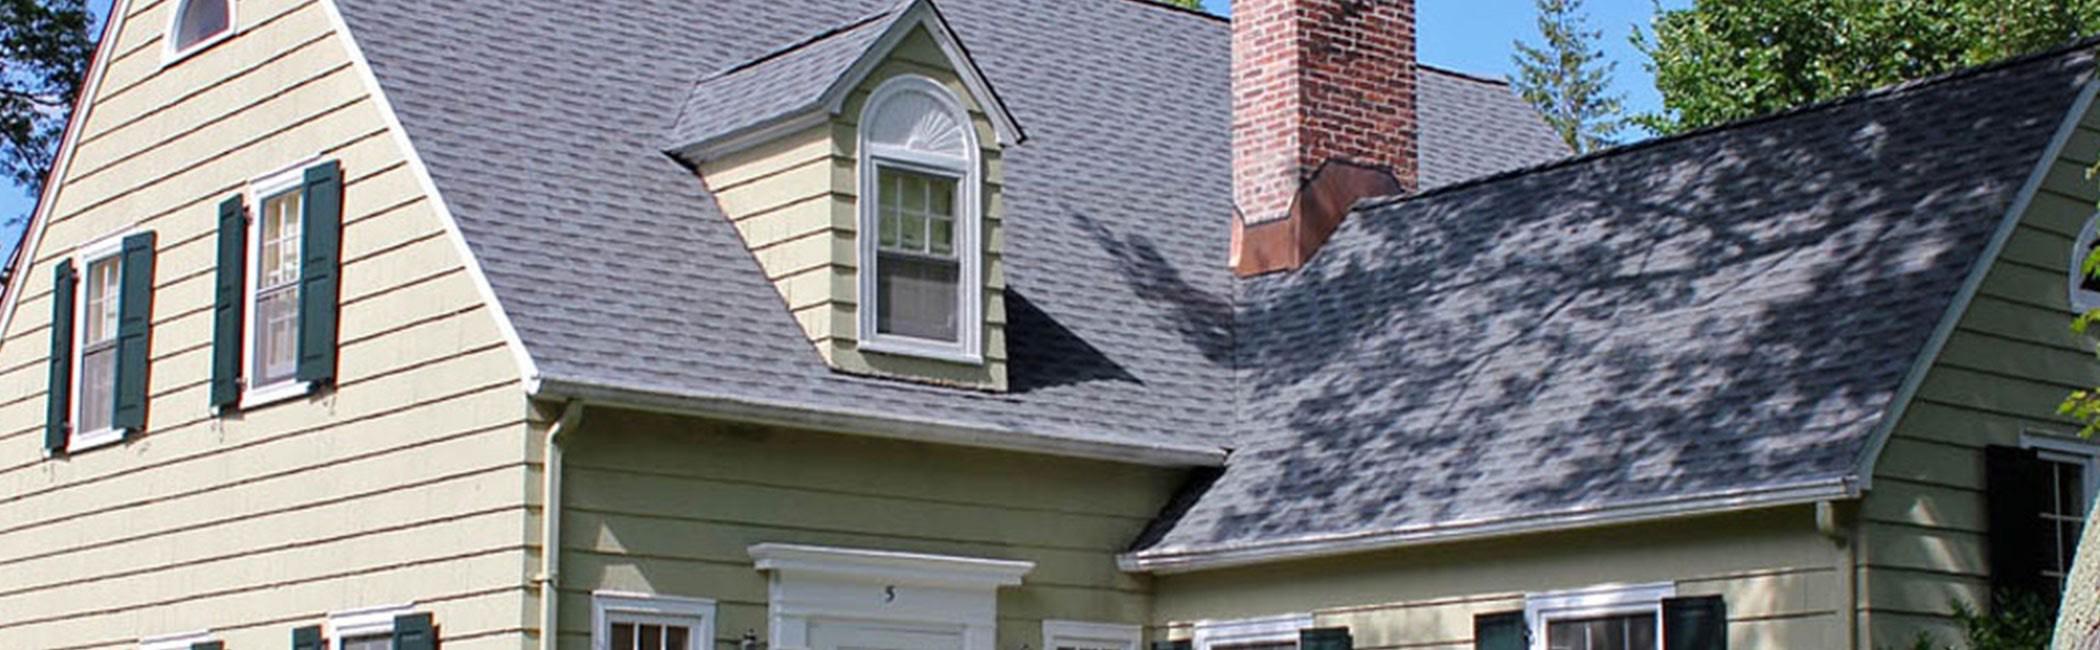 Residential Roofing: Top 5 Maintenance Tips for Spring